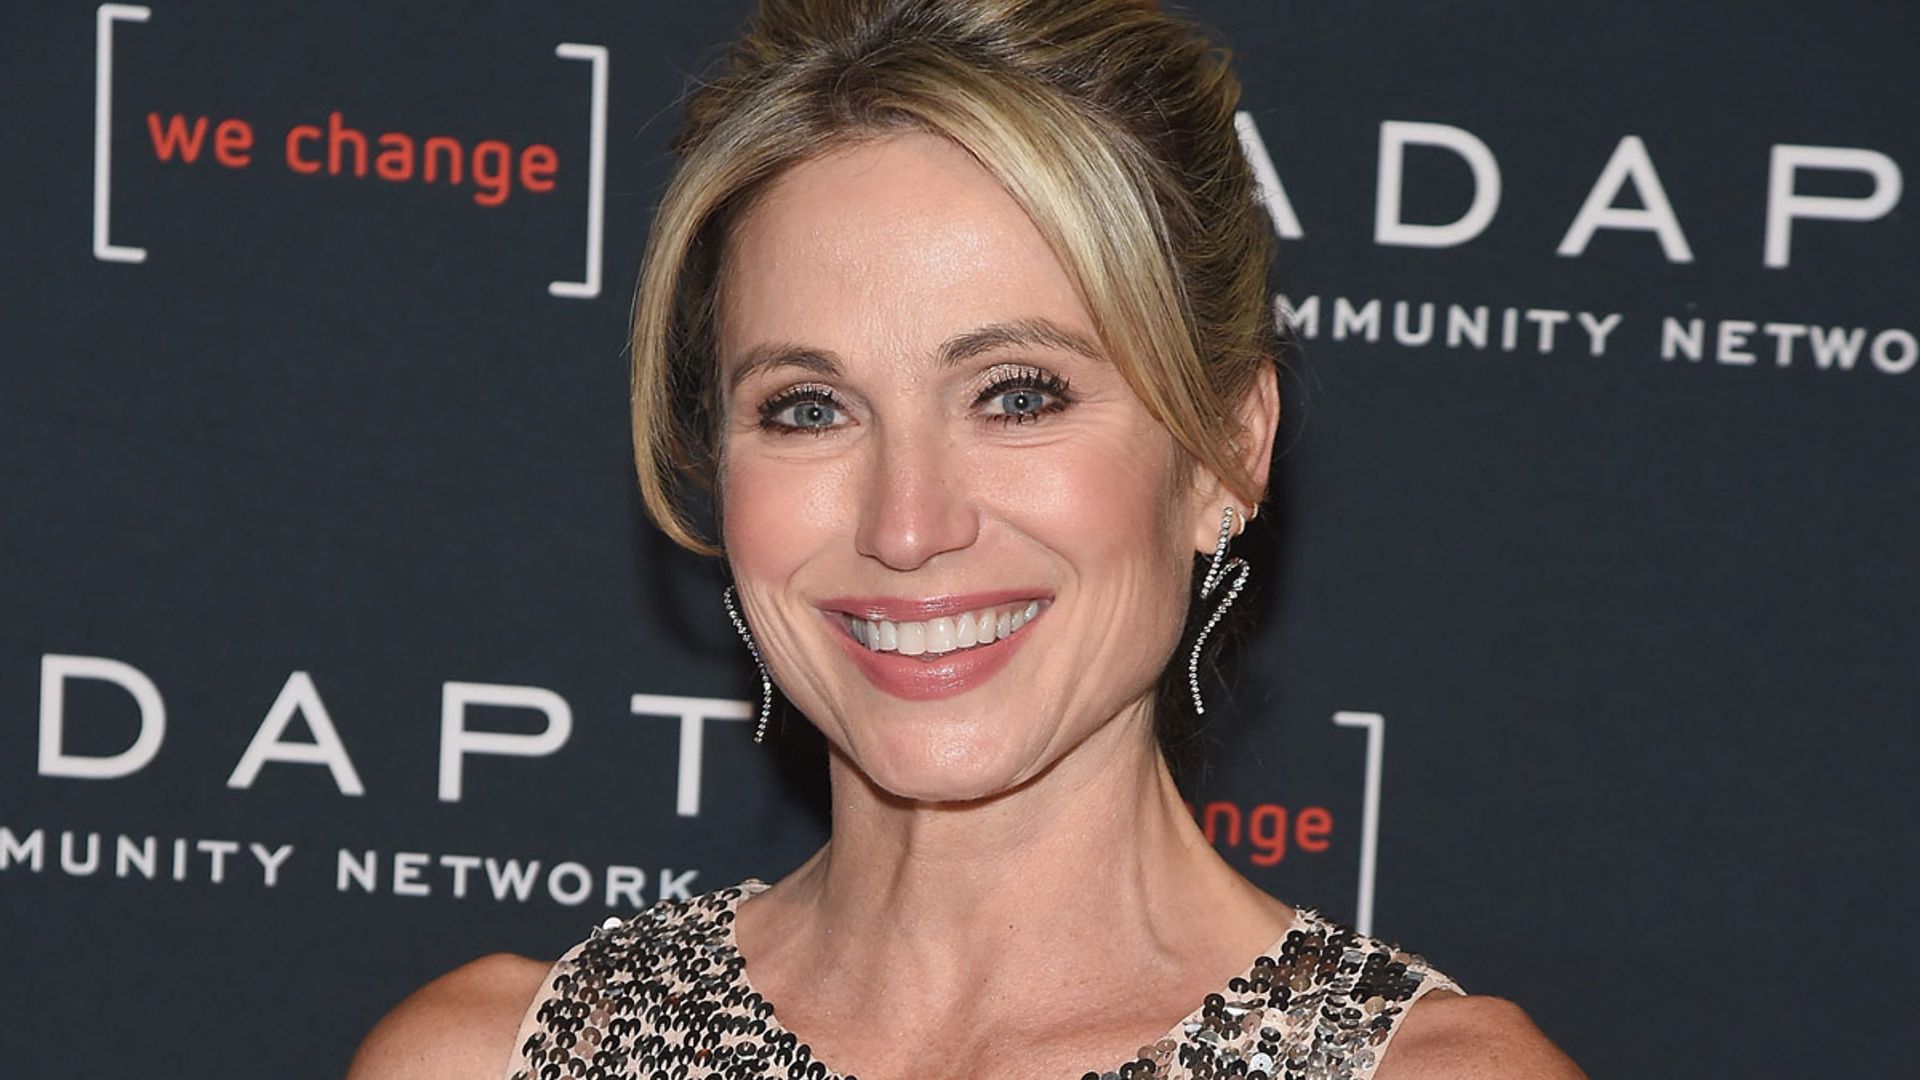 GMA's Amy Robach rocks figure-skimming top and flattering fitted pants